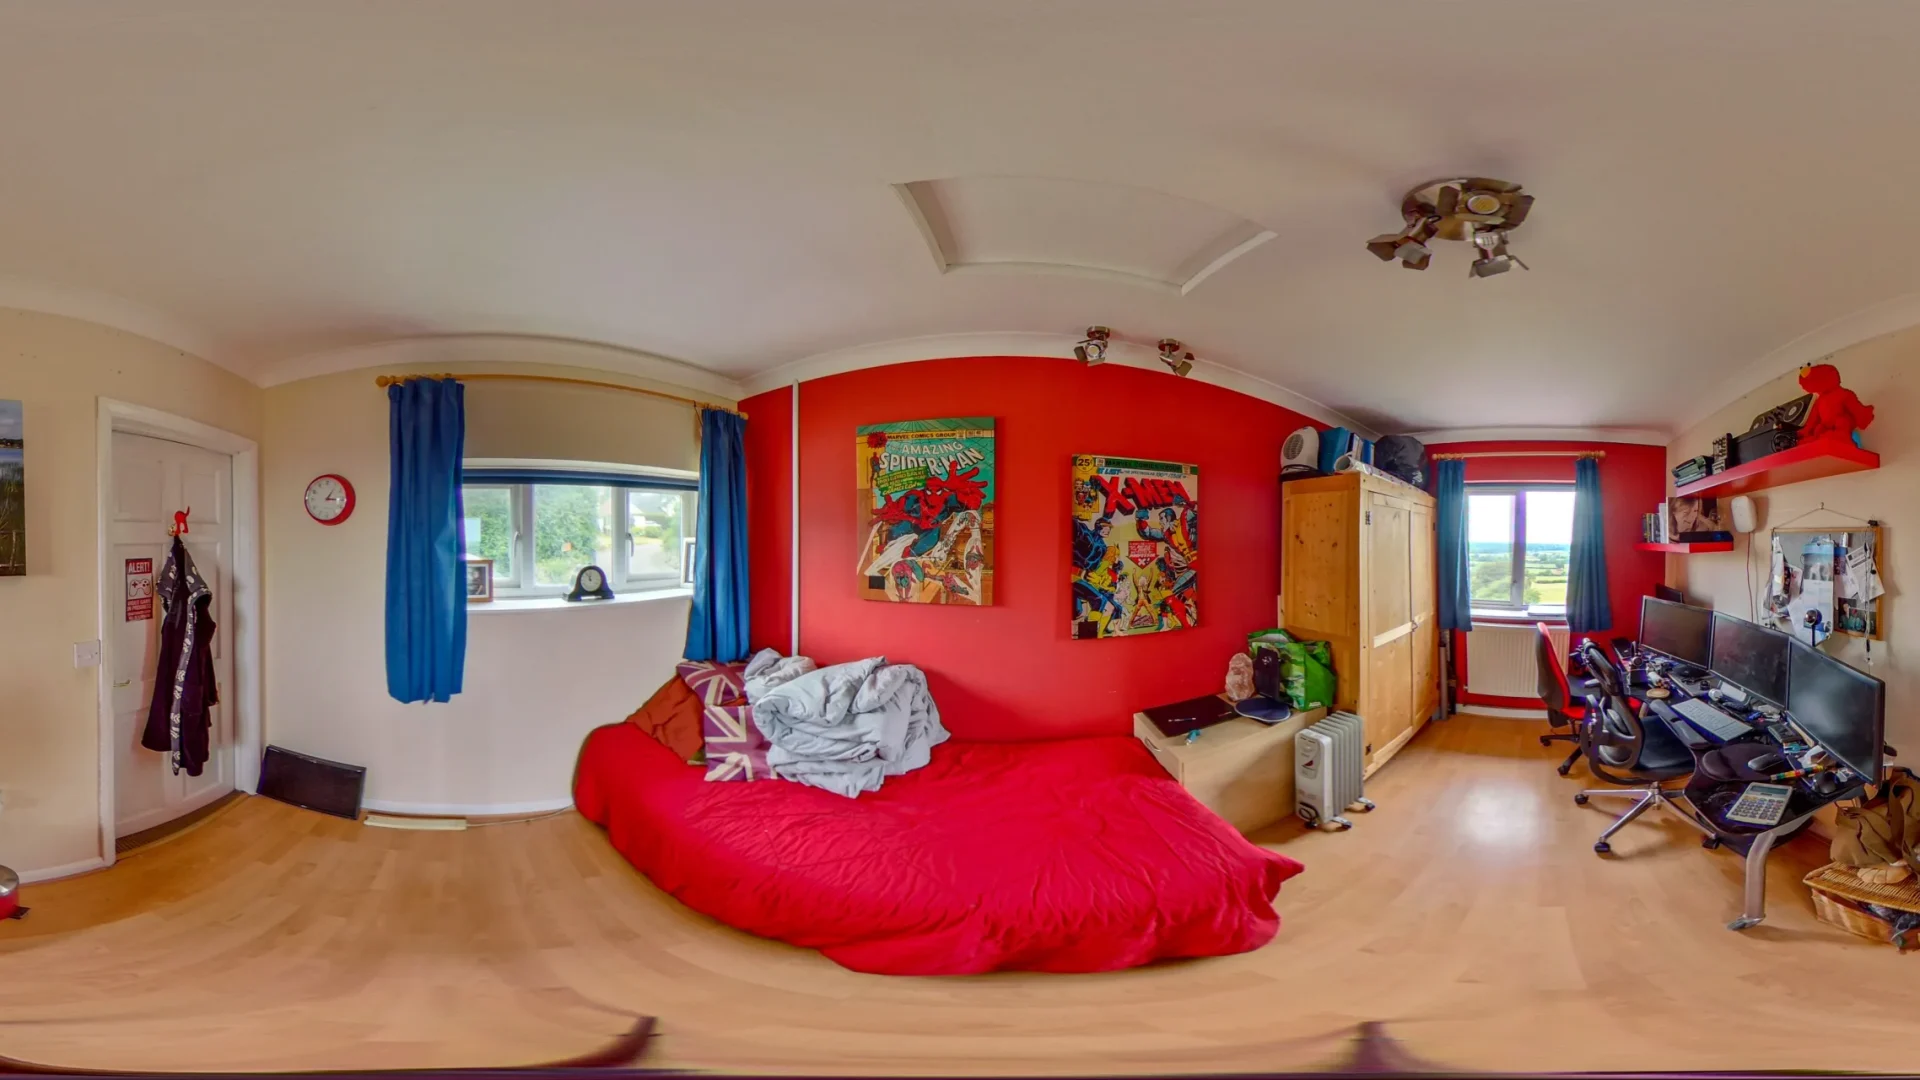 A vibrant kids bedroom with colourful walls and a captivating red bed at its heart, offering a 360-degree view.